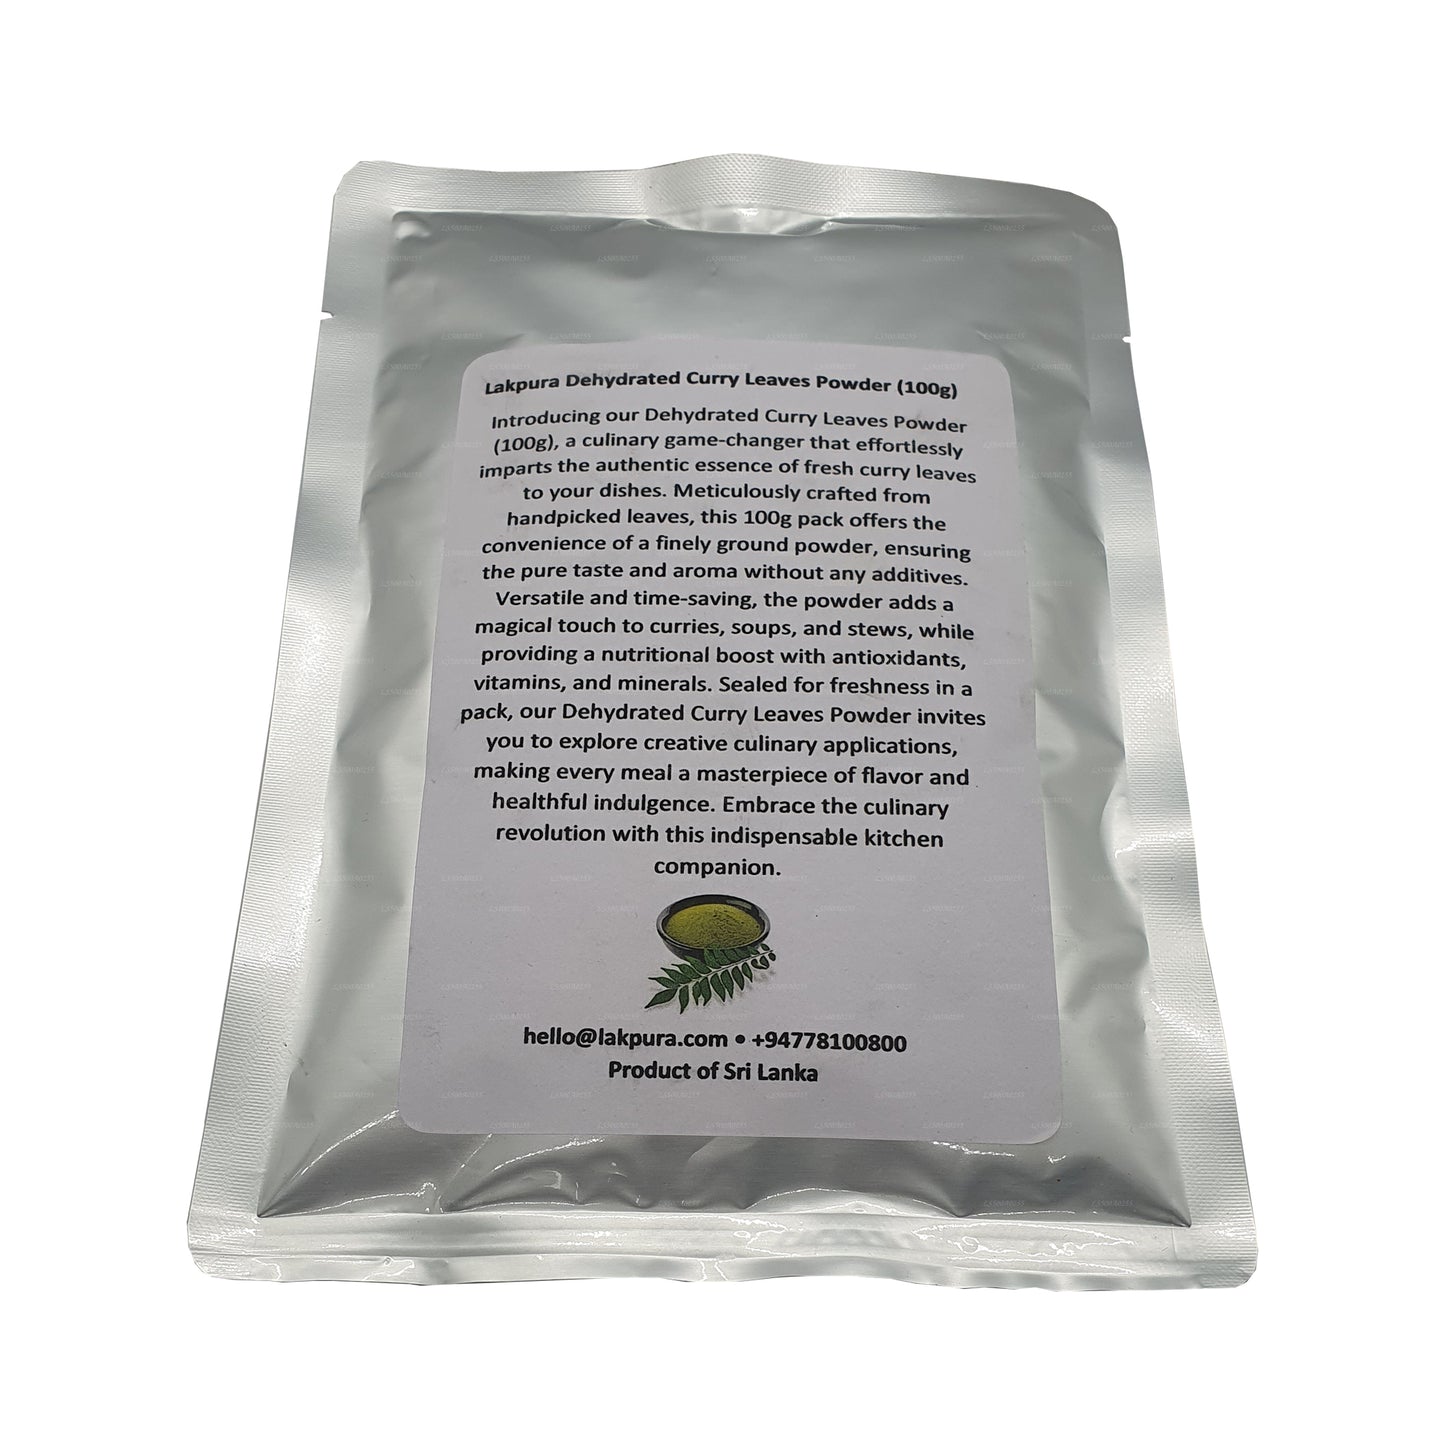 Lakpura Dehydrated Curry Leaves Powder (100g)